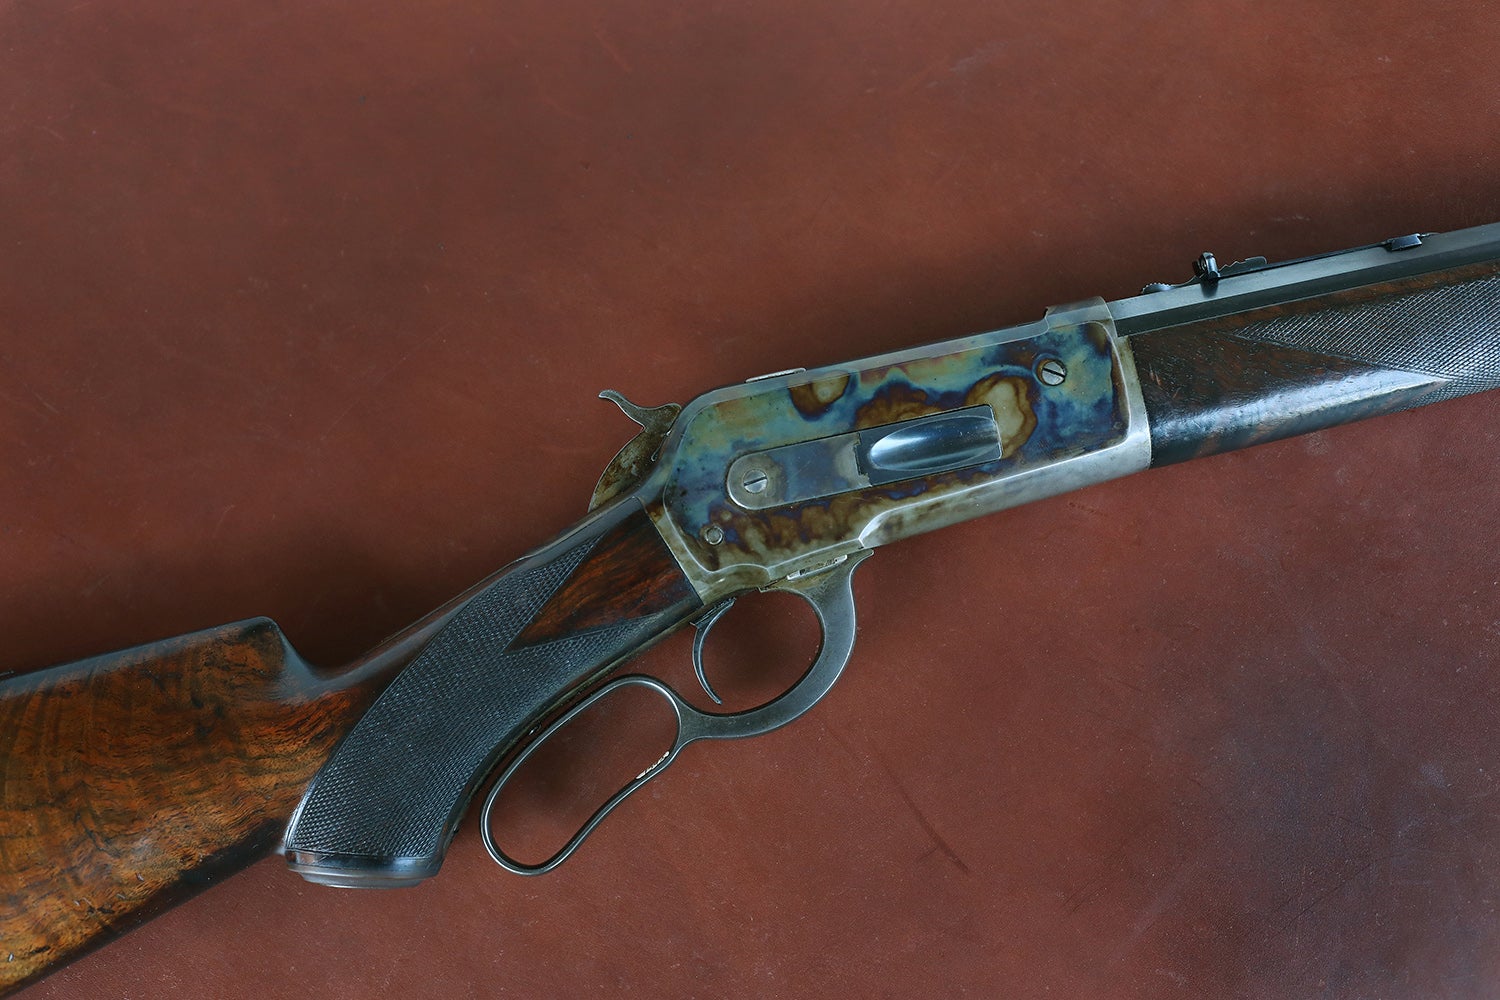 Teddy Roosevelt's lever-action rifle, winchester 1886.